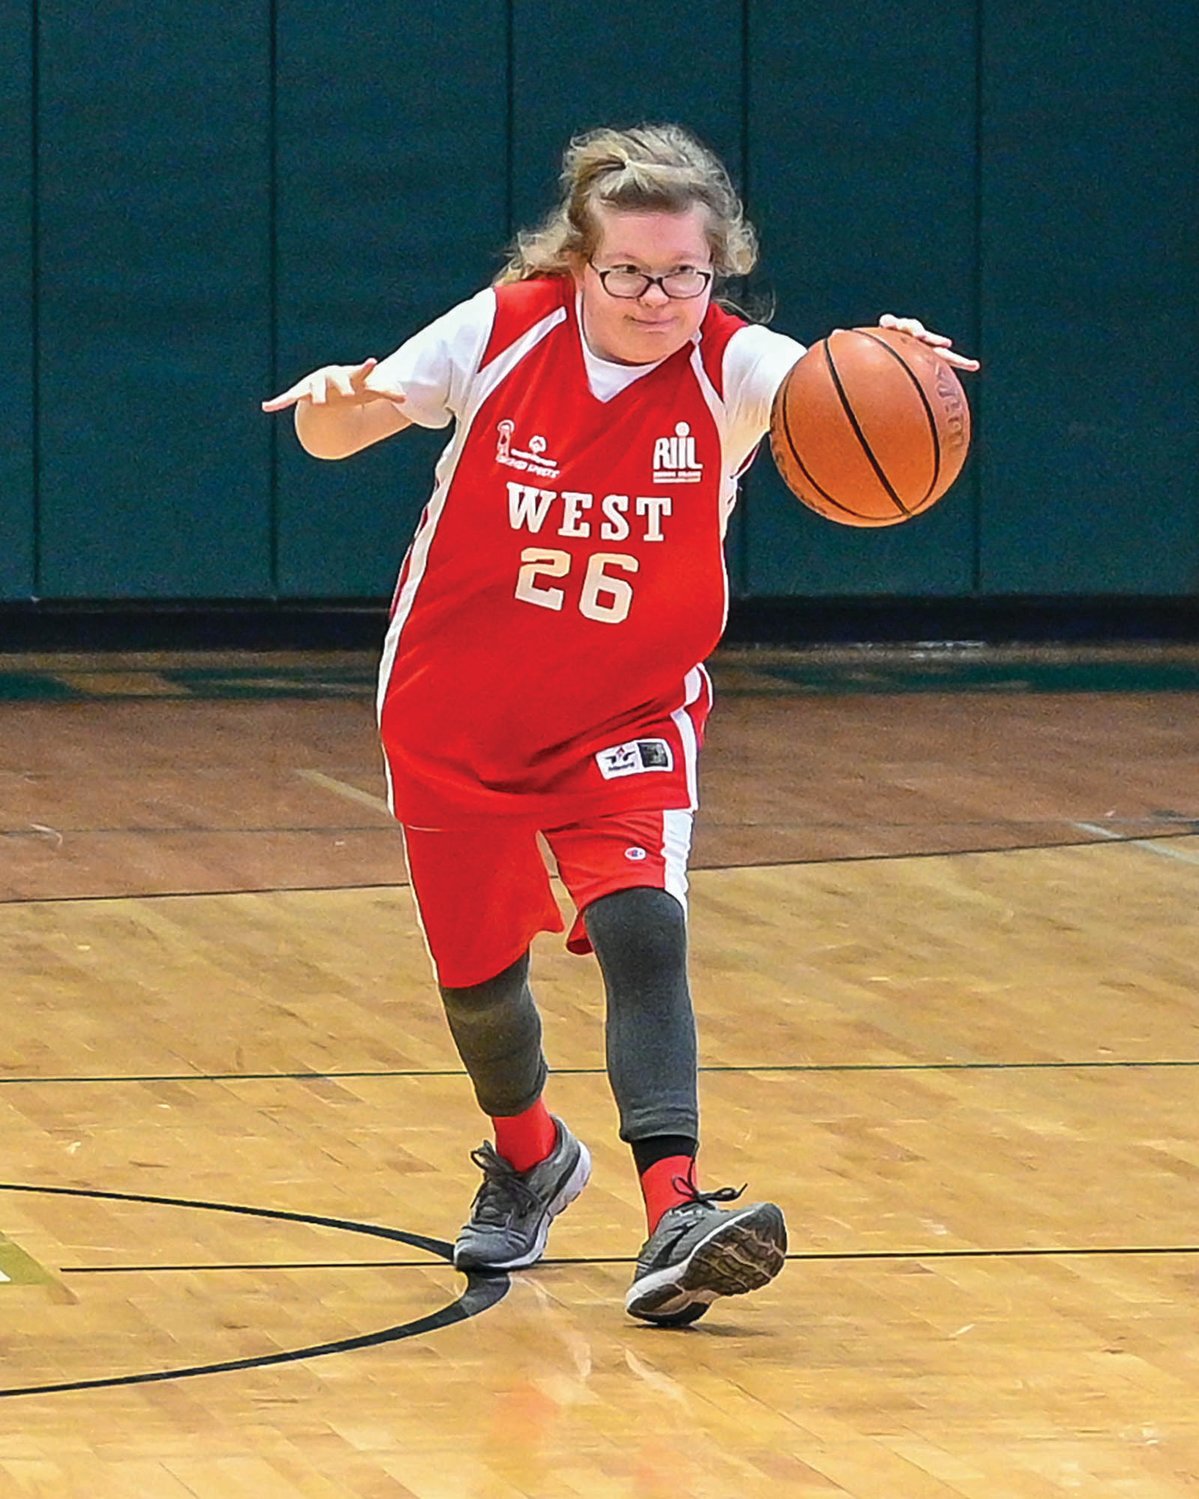 BACK AT IT: Cranston West’s Avery Ream works the ball up the court against Bishop Hendricken last week.